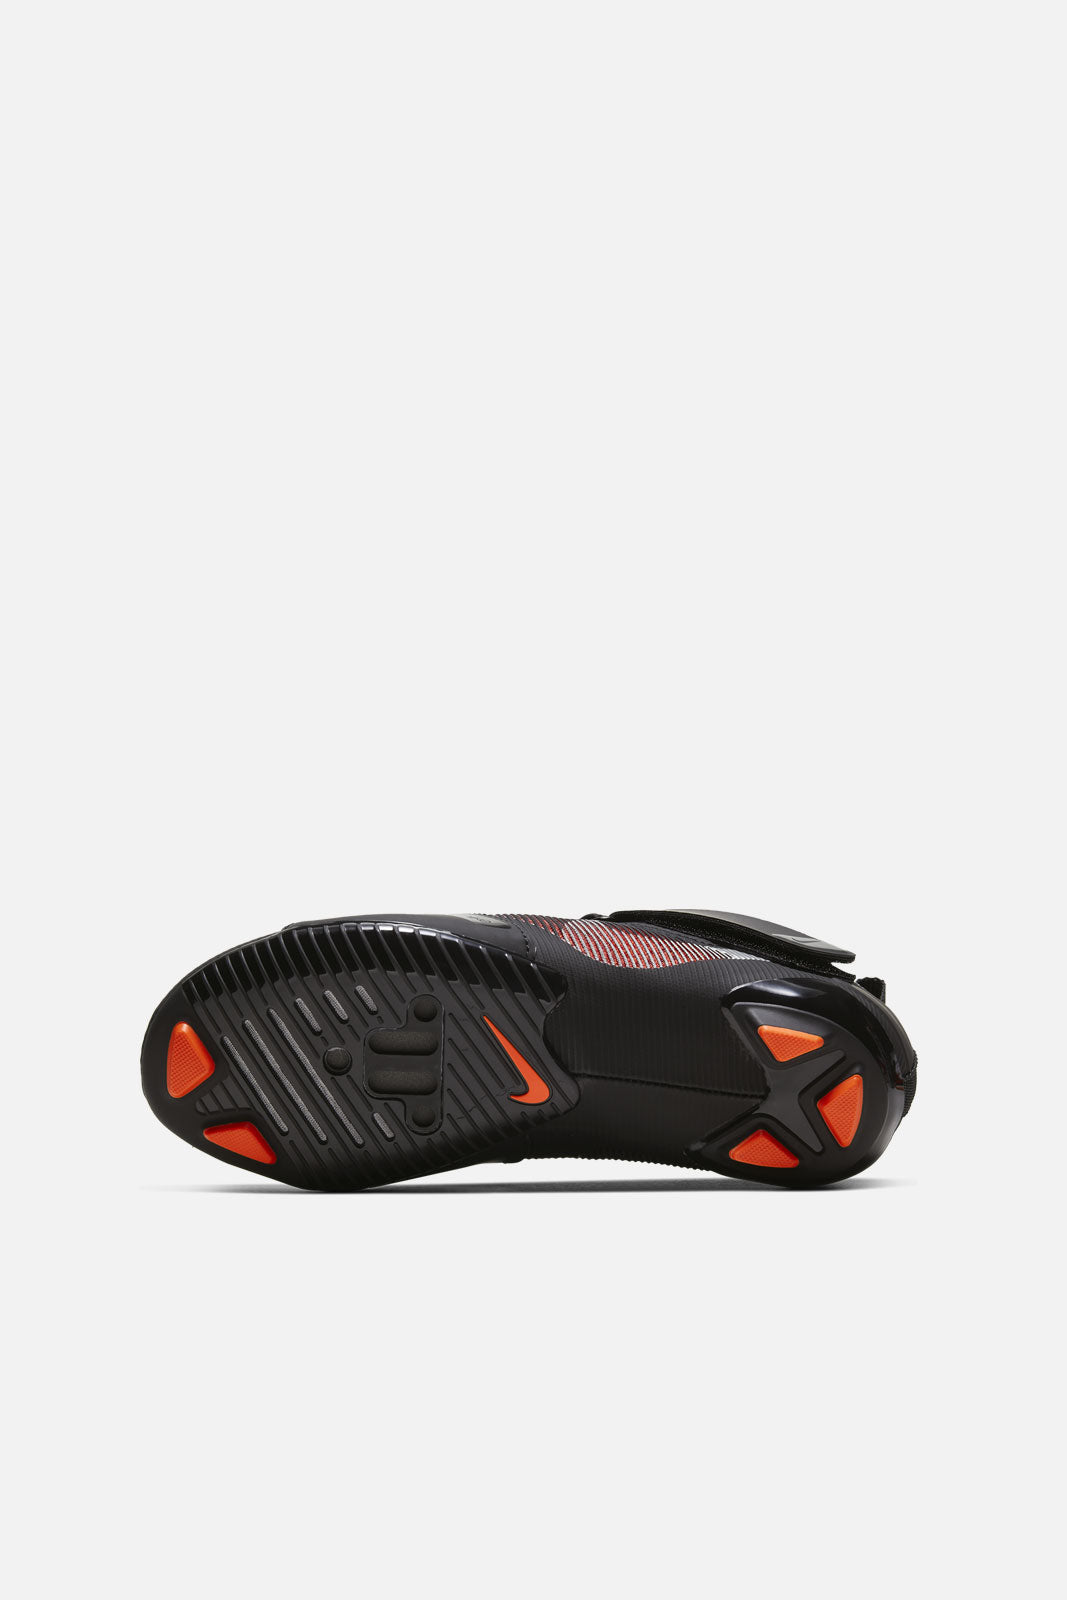 nike cycling shoes for sale